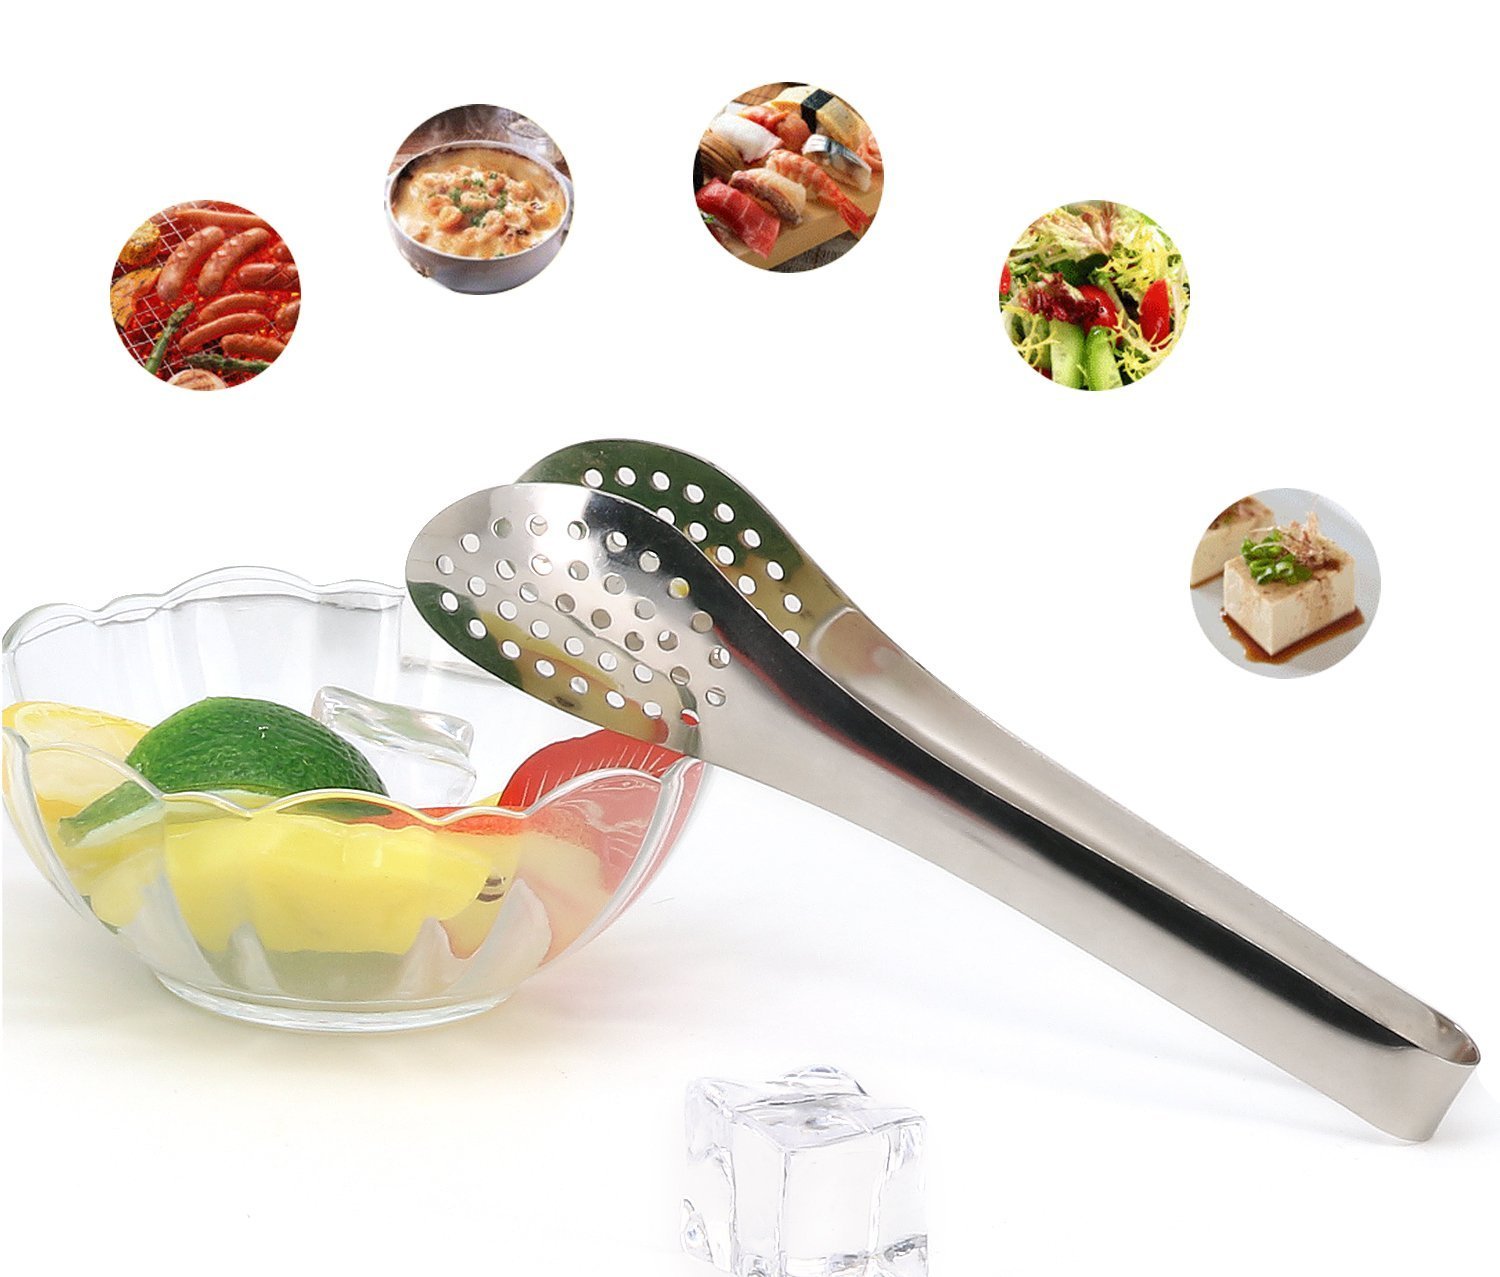 Stainless Steel Vegetable Steamer, Pasta Steamer, Folding Collapsible Basket for Various Size Pots